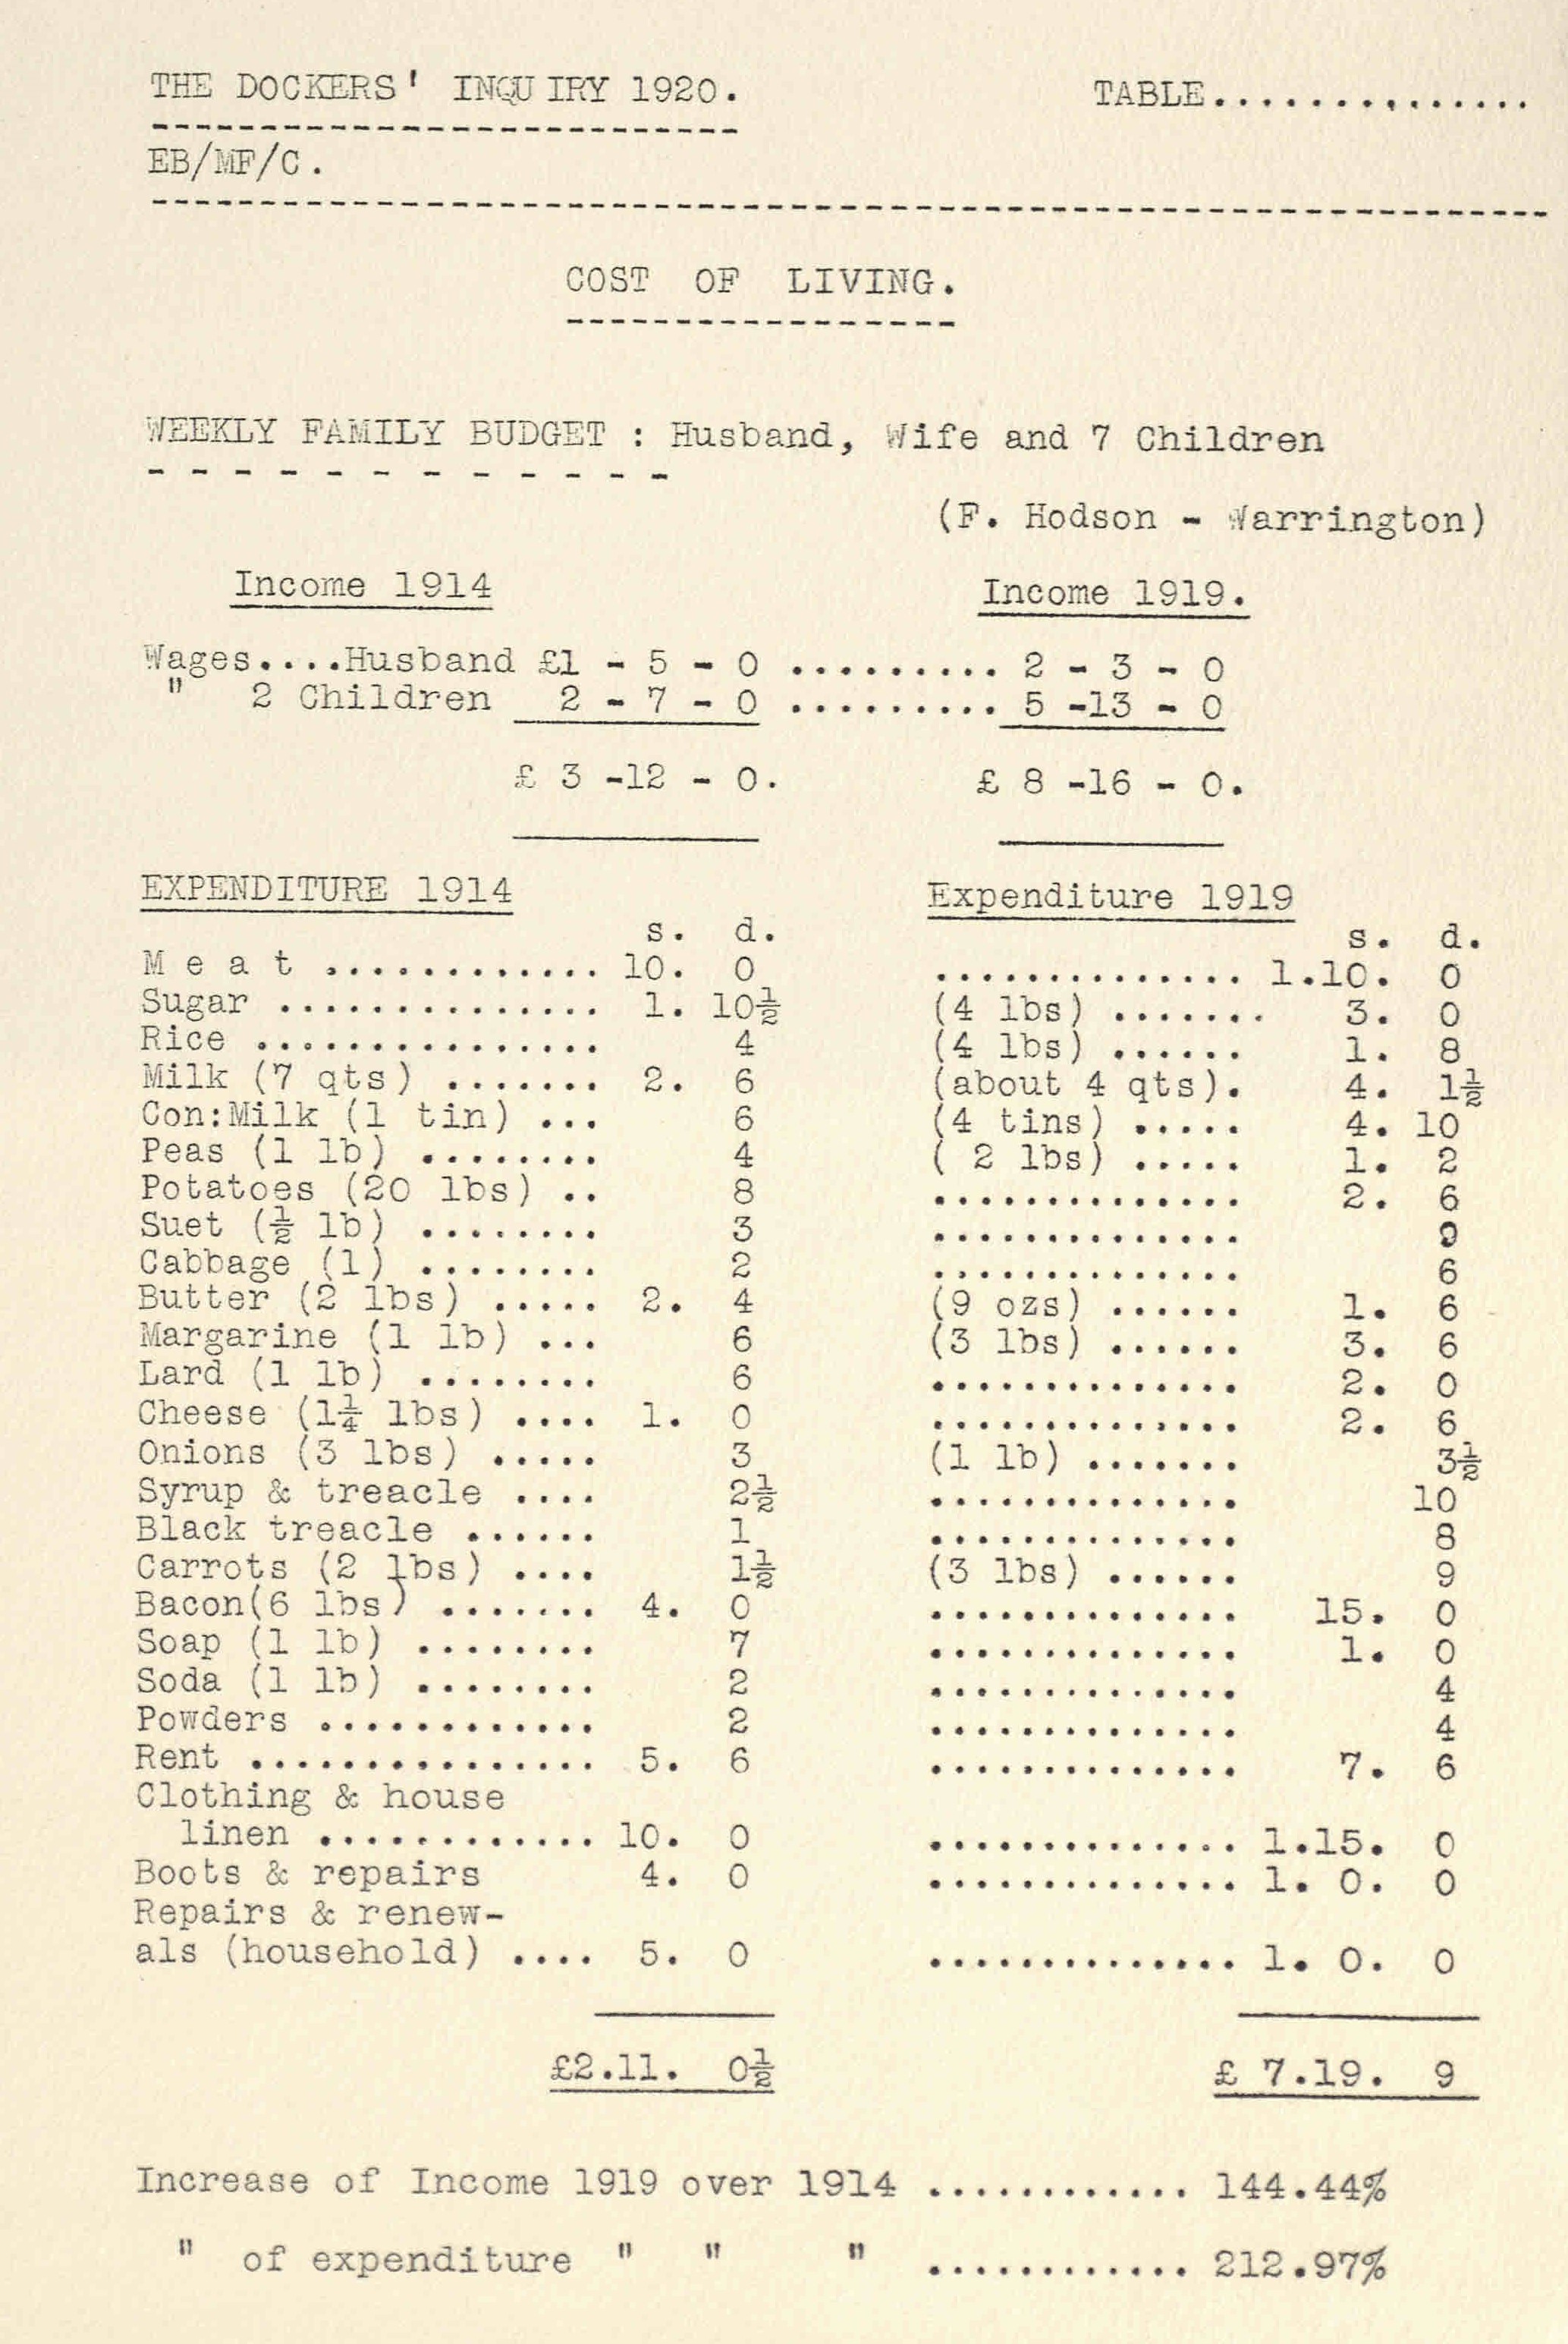 Outline of the weekly budget for a family of nine, comparing prices in 1914 and 1919 to highlight the levels of inflation in income and expenditure